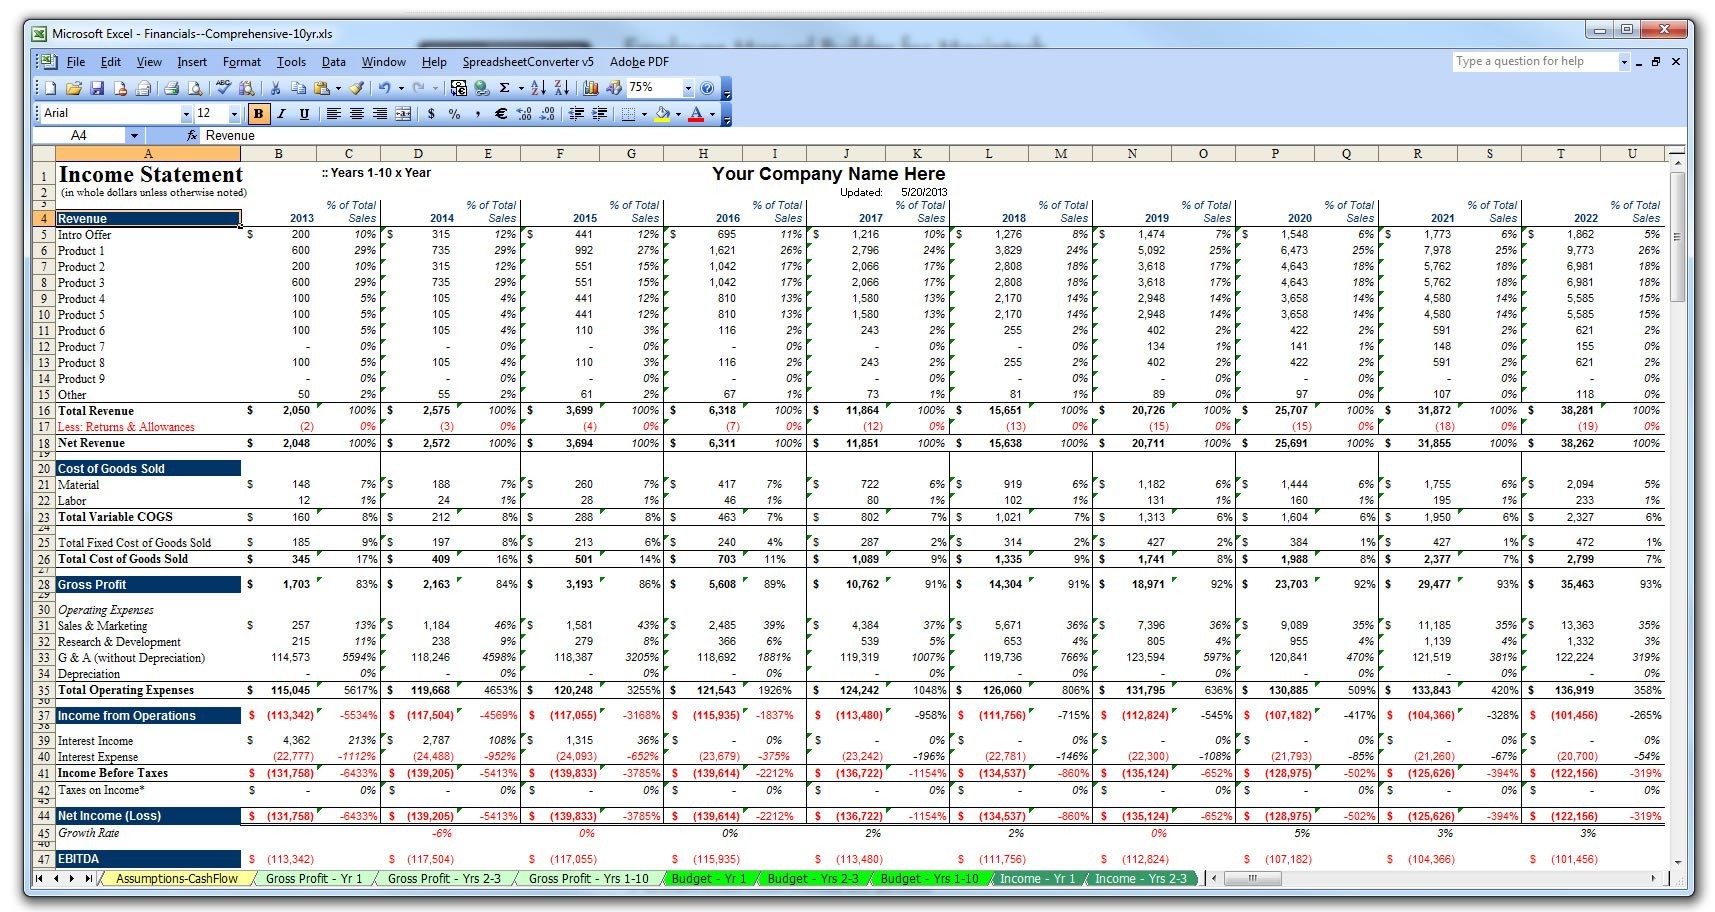 10 Year Business Plan Financial Budget Projection Model In Excel Document Projections